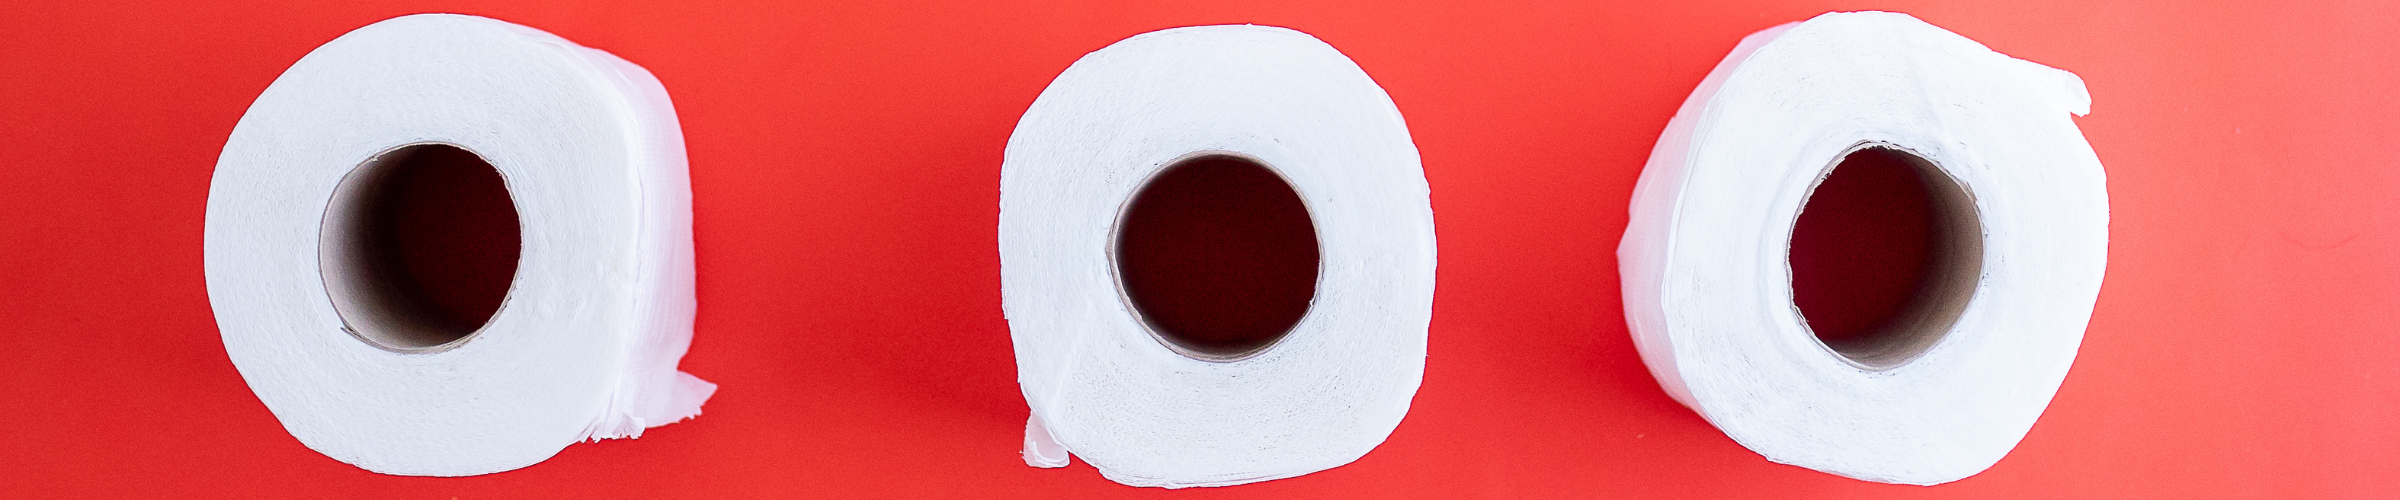 three toilet paper rolls seen from the top. they sit side by side on a red background.